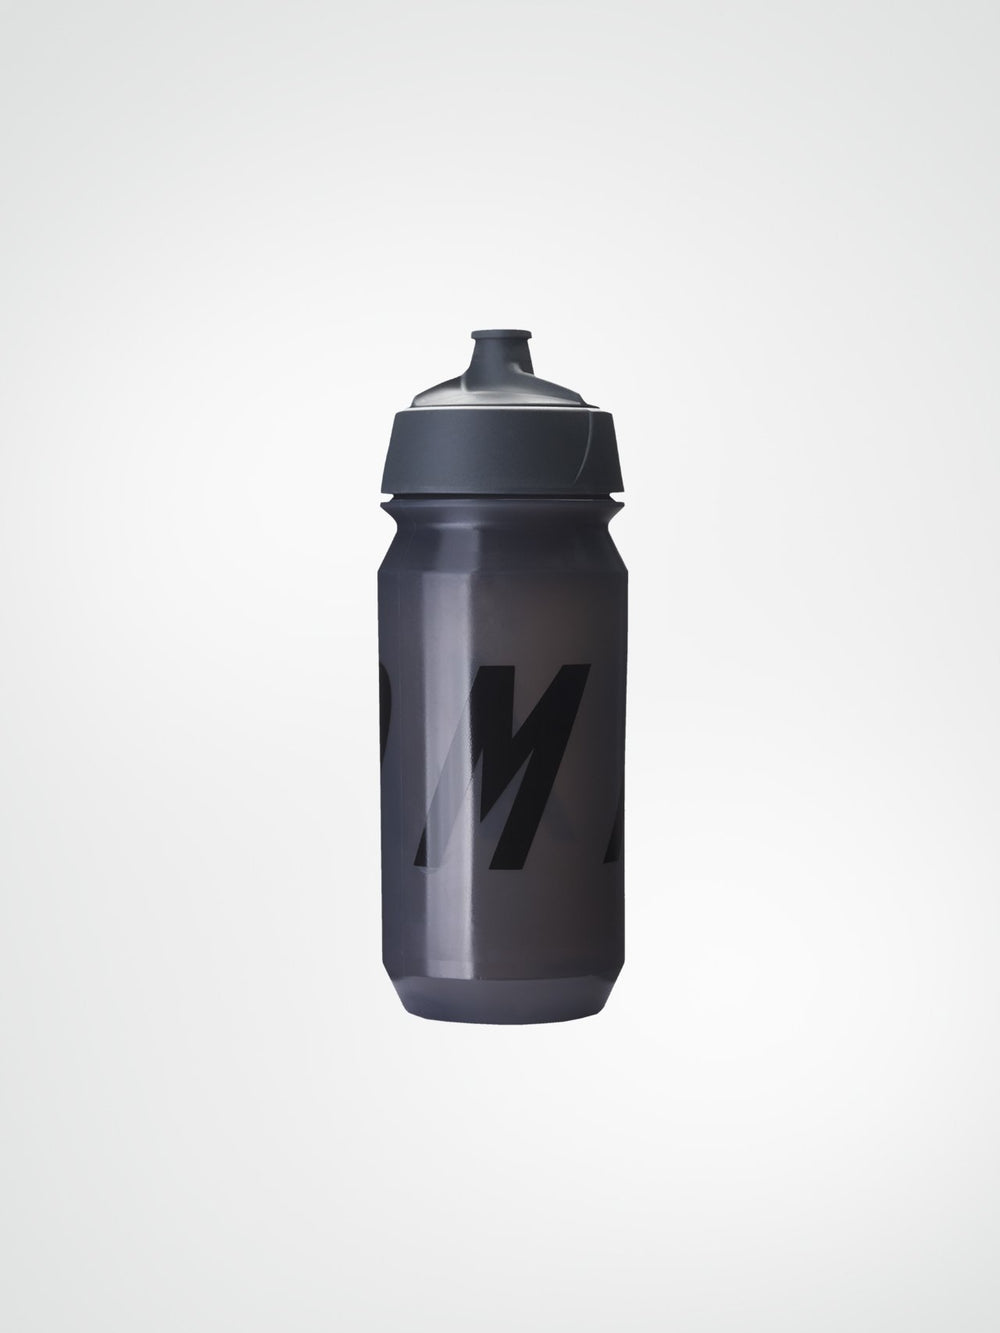 Product Image for Core Bottle